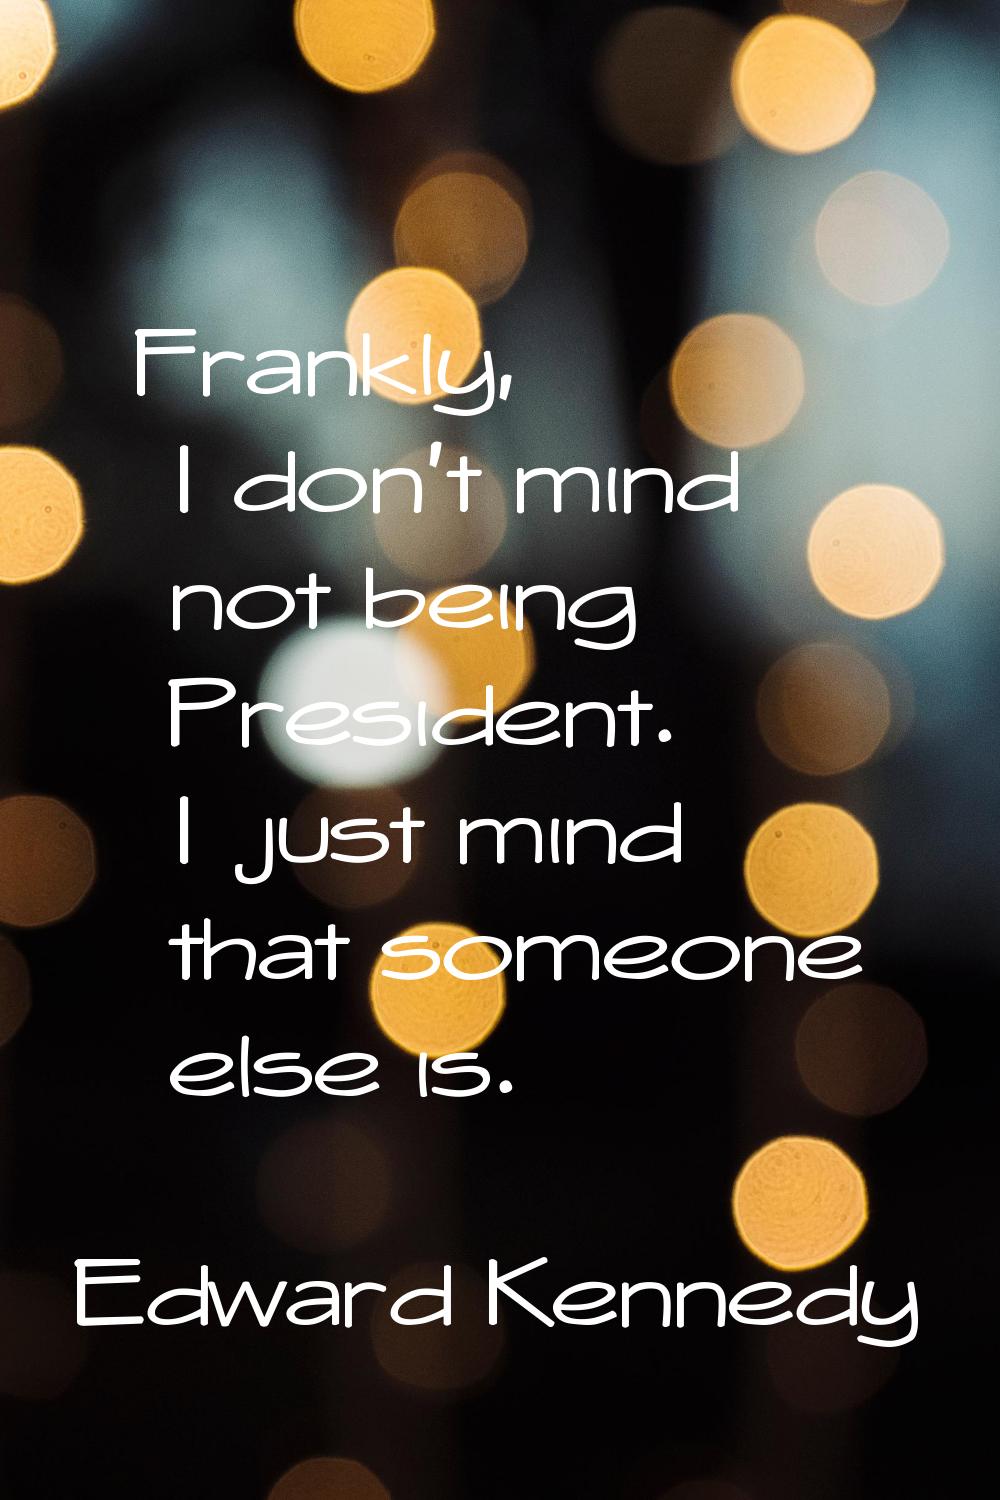 Frankly, I don't mind not being President. I just mind that someone else is.